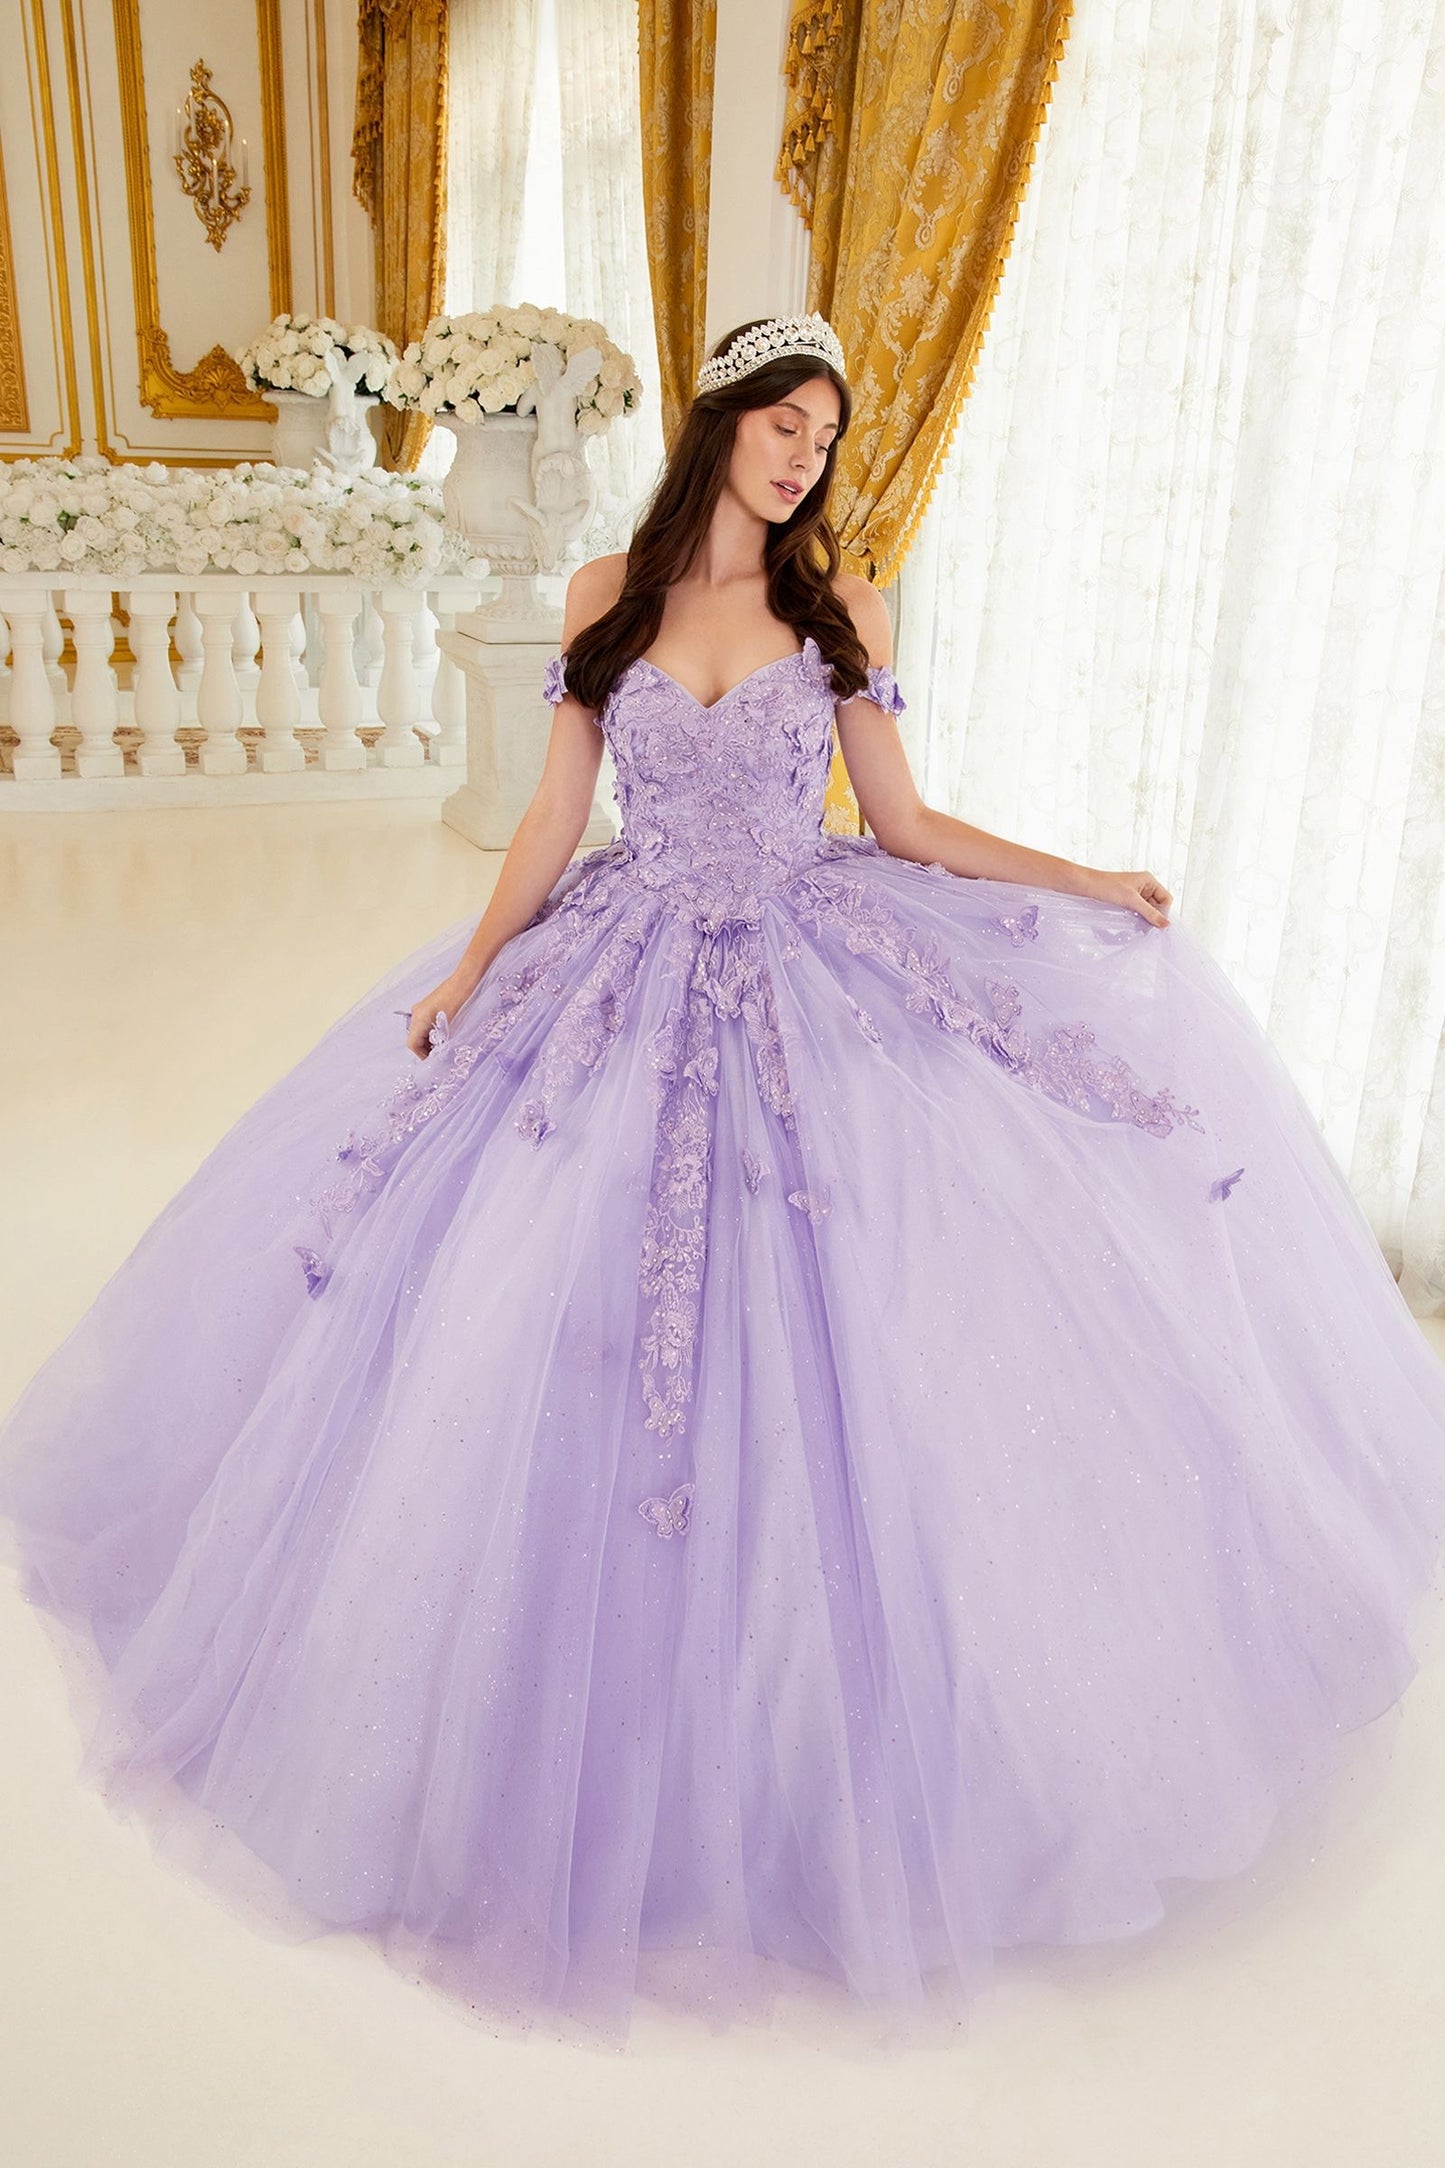 The Ladivine 15709 quinceanera dress will have you feeling like royalty! This stunning ballgown features a shimmery off-the-shoulder neckline with a corset lace-up and train - perfect for making a grand entrance! Now if just Cinderella could catch a break... Step into a dream wearing this beautiful off the shoulder butterfly ball gown! 